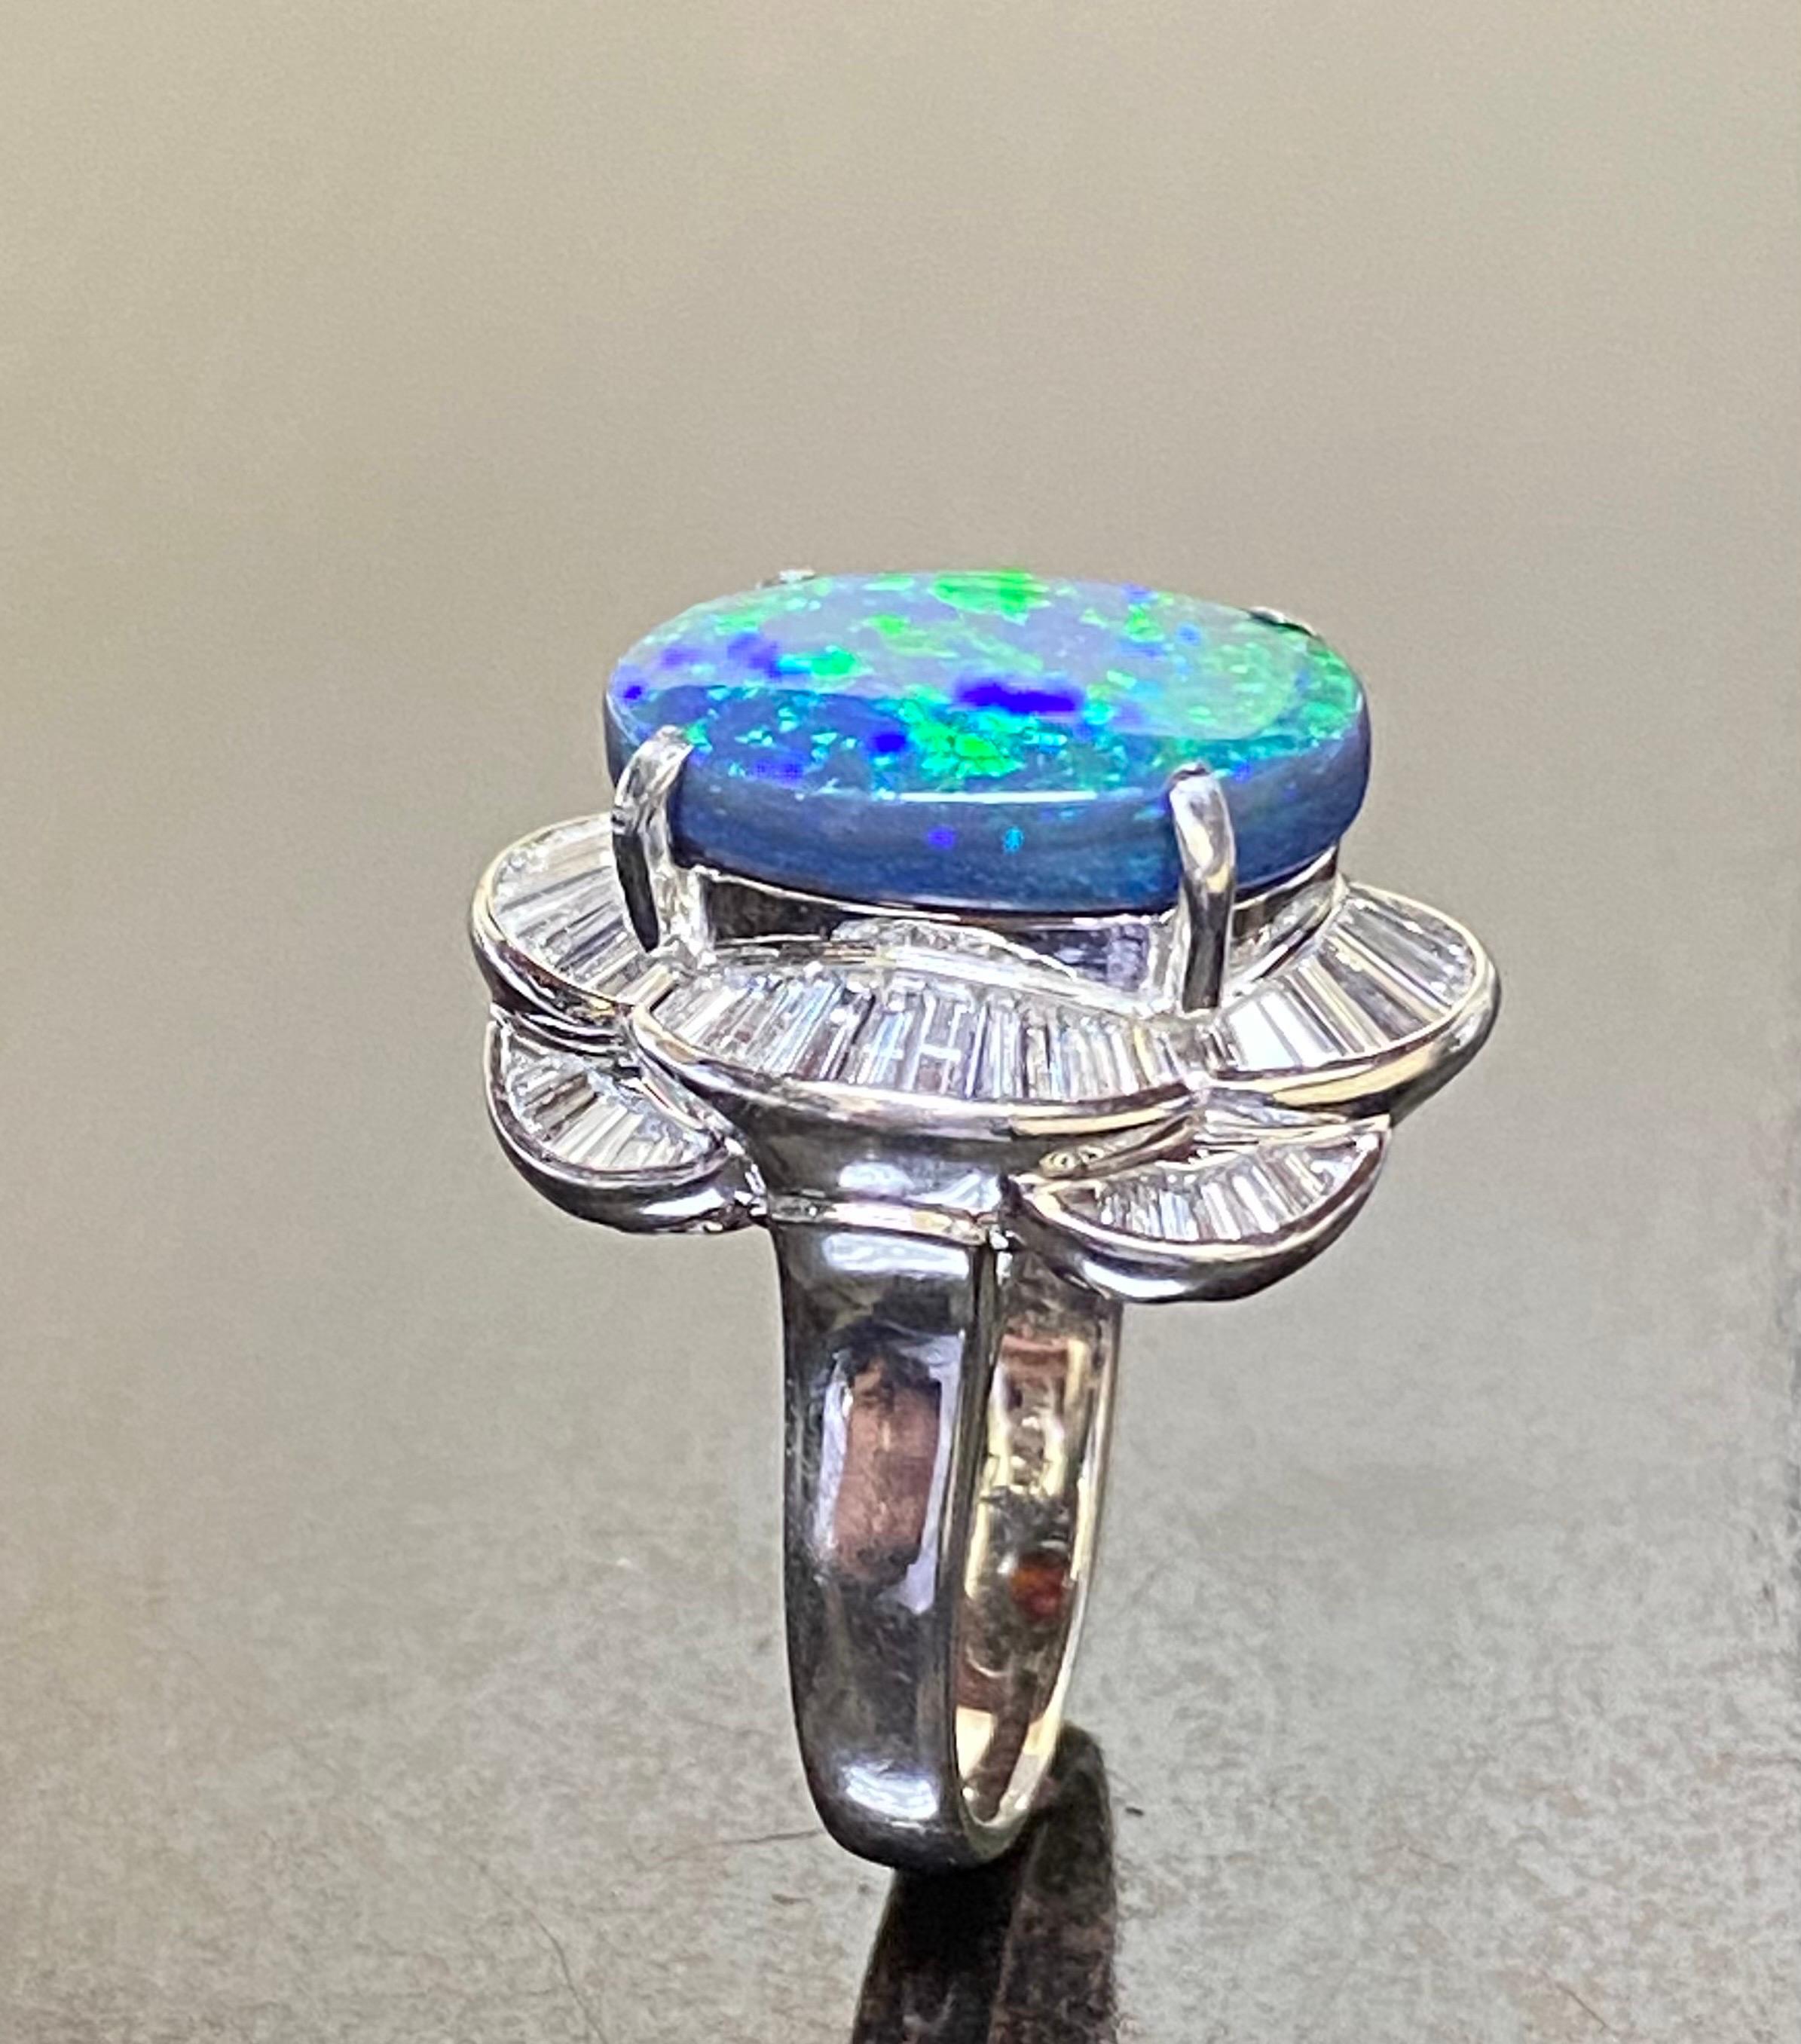 DeKara Designs Collection 

Our latest design! An entirely handmade ONE OF A KIND elegant and lustrous Lightning Ridge Australian Black Opal cabochon surrounded by beautiful baguette diamonds in a platinum setting.

Metal- 90% Platinum, 10% Iridium.